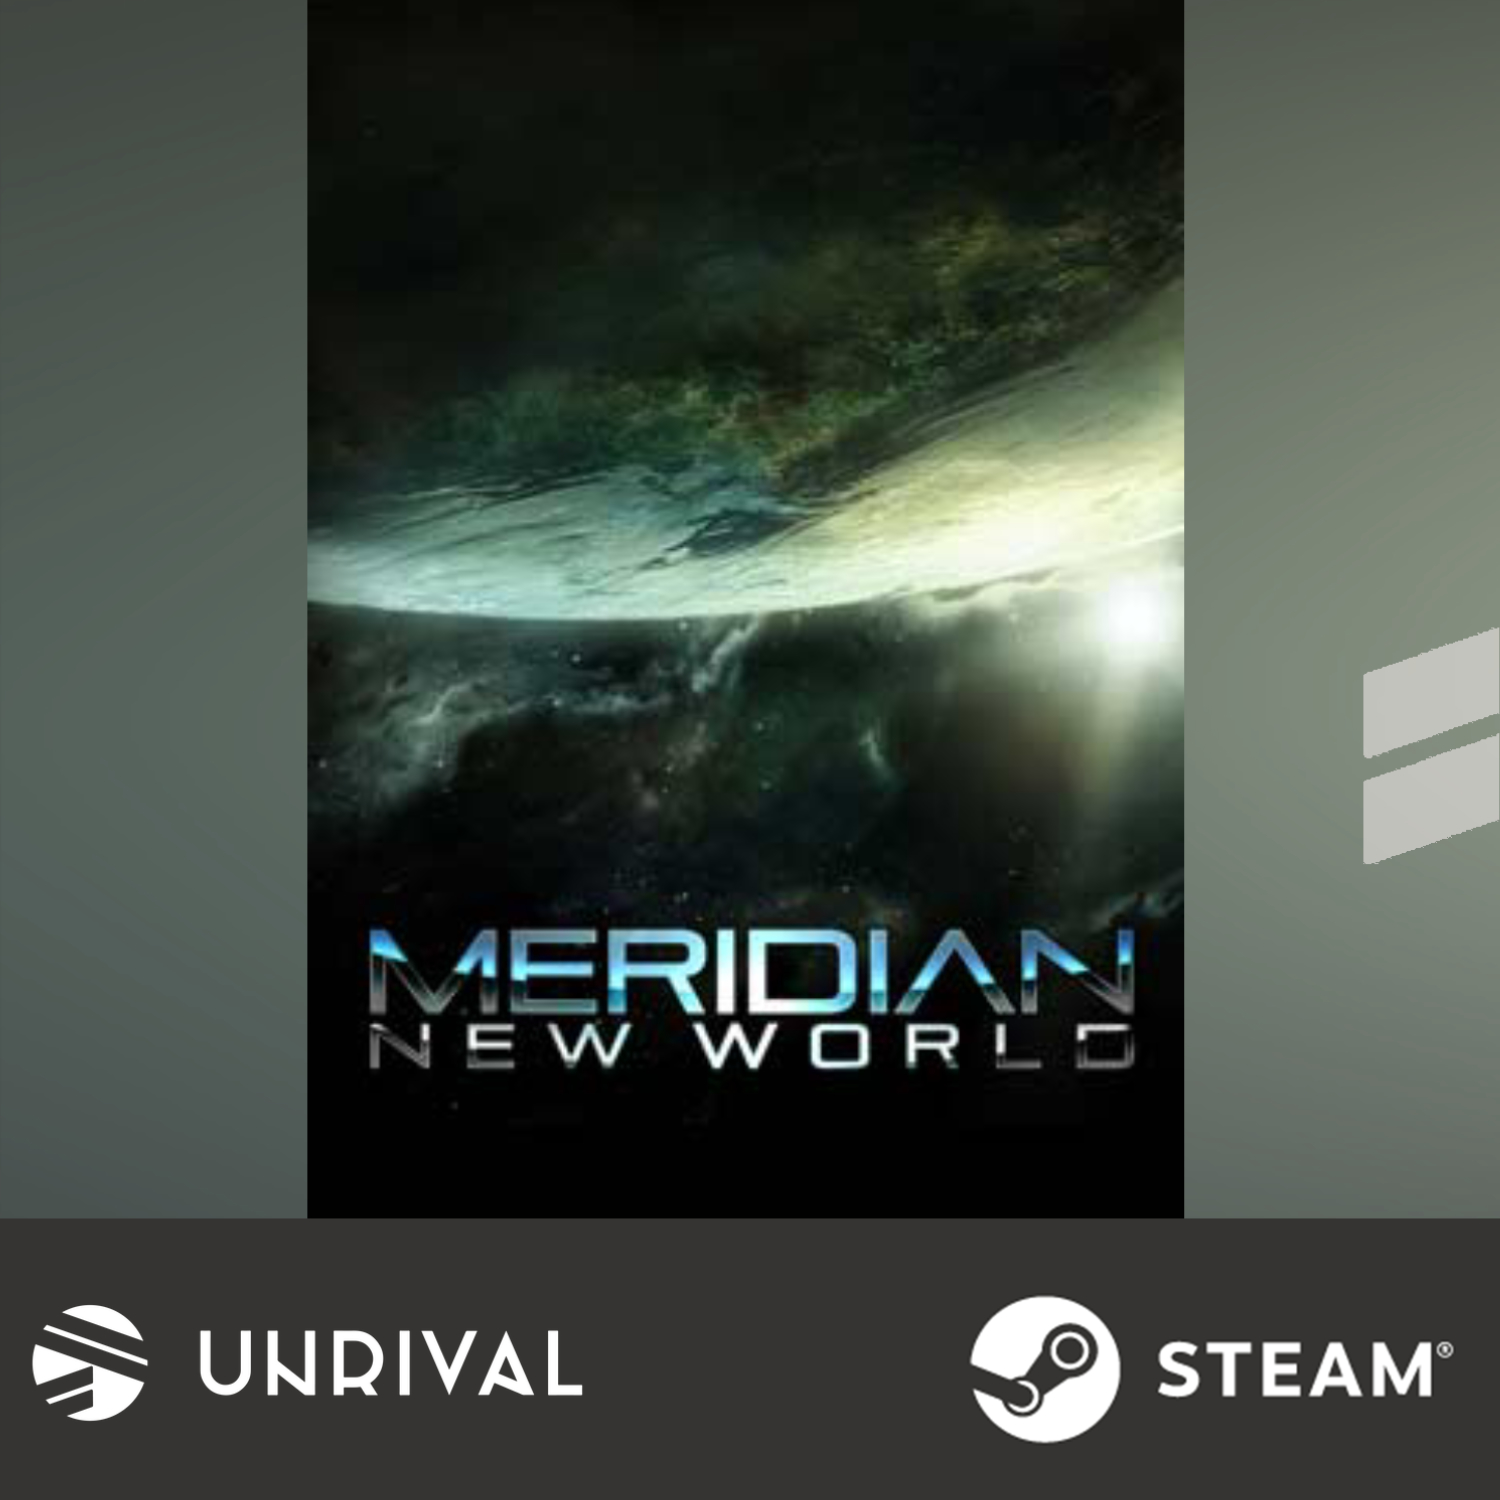 [Hot Sale] Meridian New World PC Digital Download Game - Unrival